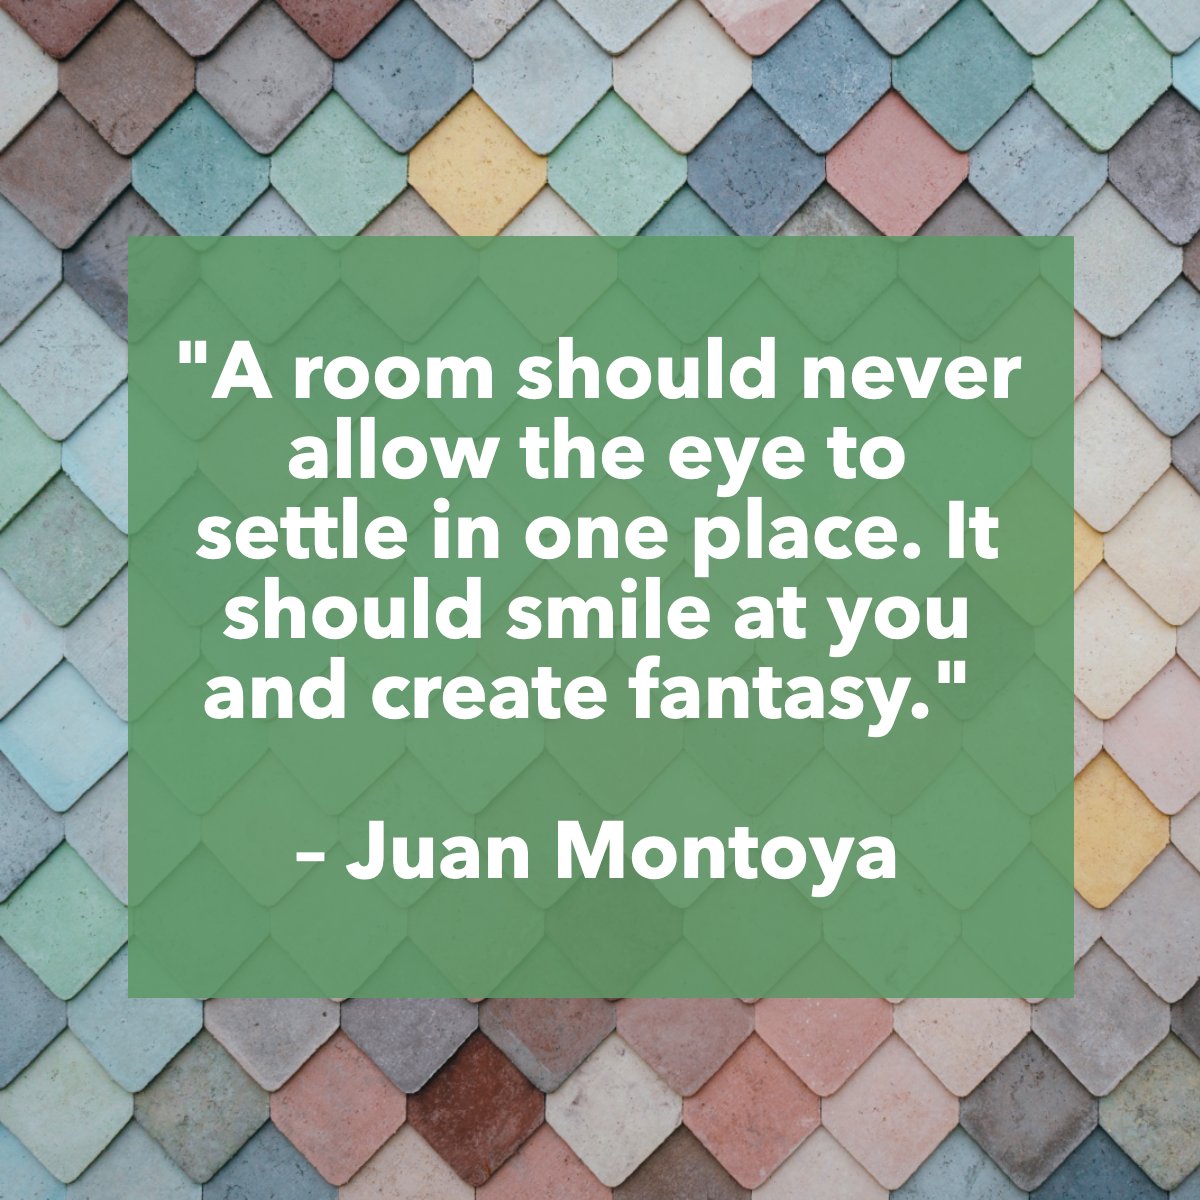 'A room should never allow the eye to settle in one place. It should smile at you and create fantasy.'
― Juan Montoya 📖

#design #roomdesign #decor #interior #inspiring #quote #quoteoftheday
 #myhousefl #realestate #Floridarealestate #sellyourhouse #buyyourhome